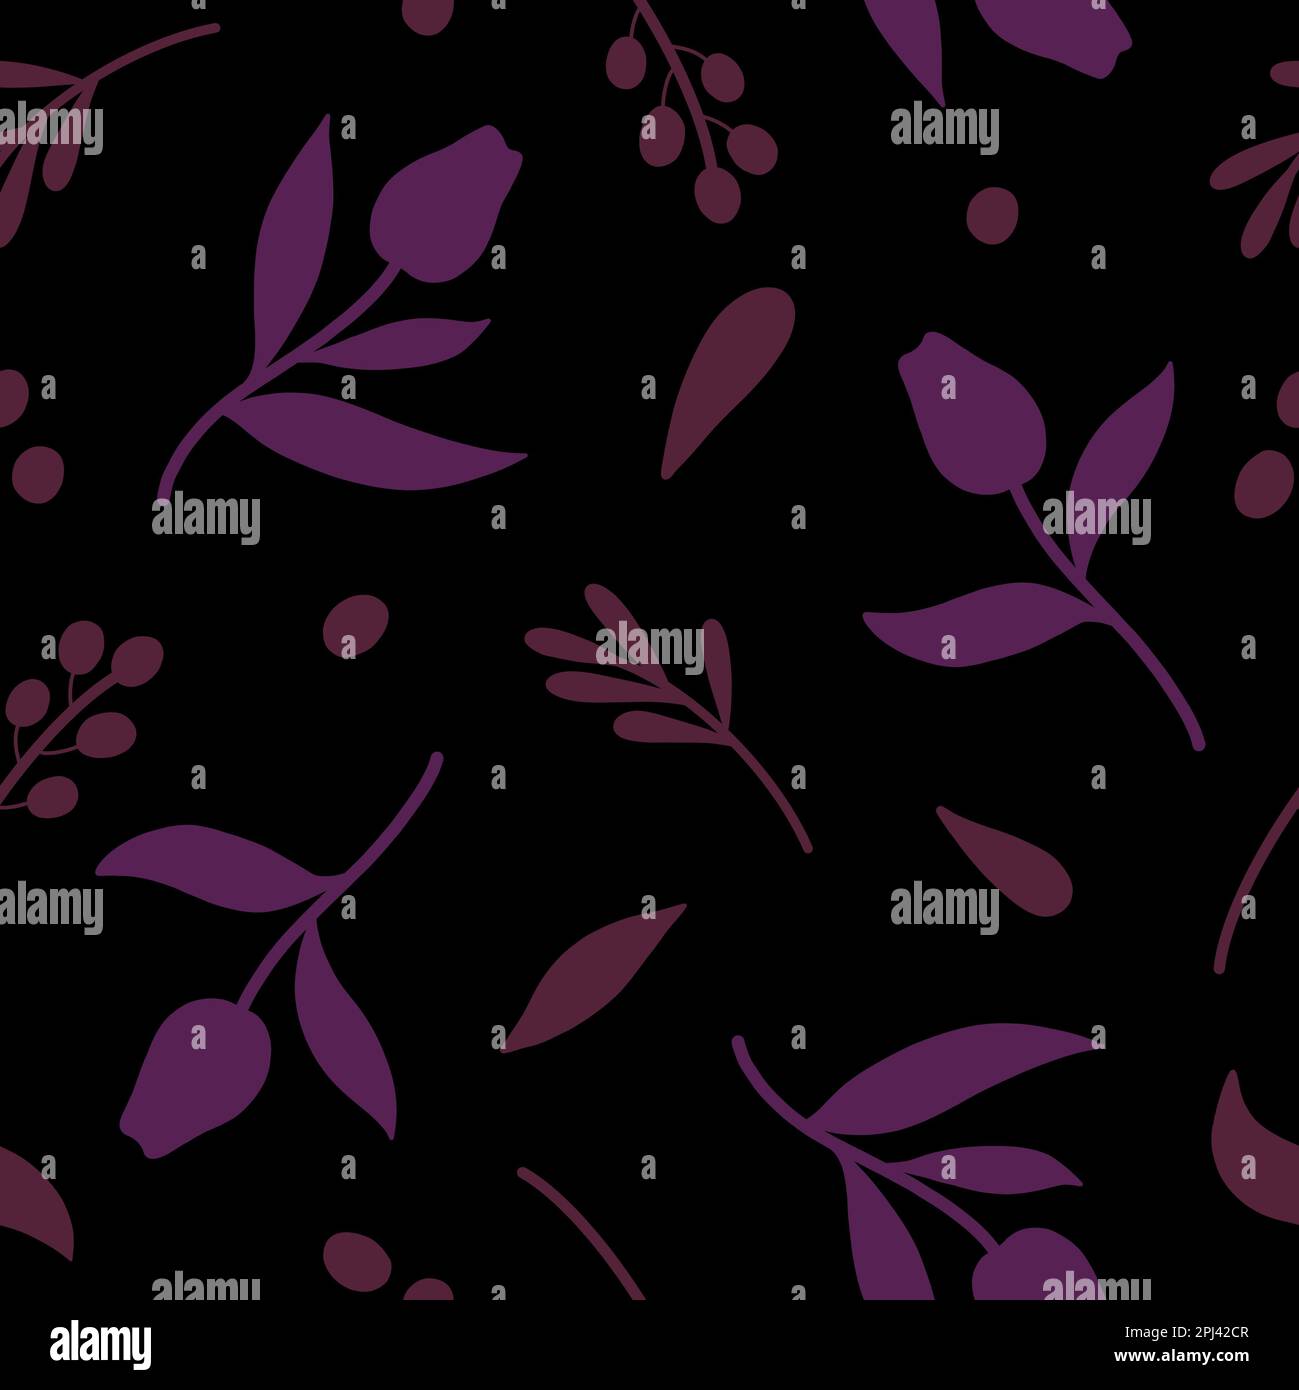 Simple floral silhouettes seamless pattern. Pink flowers on black background Stock Photo